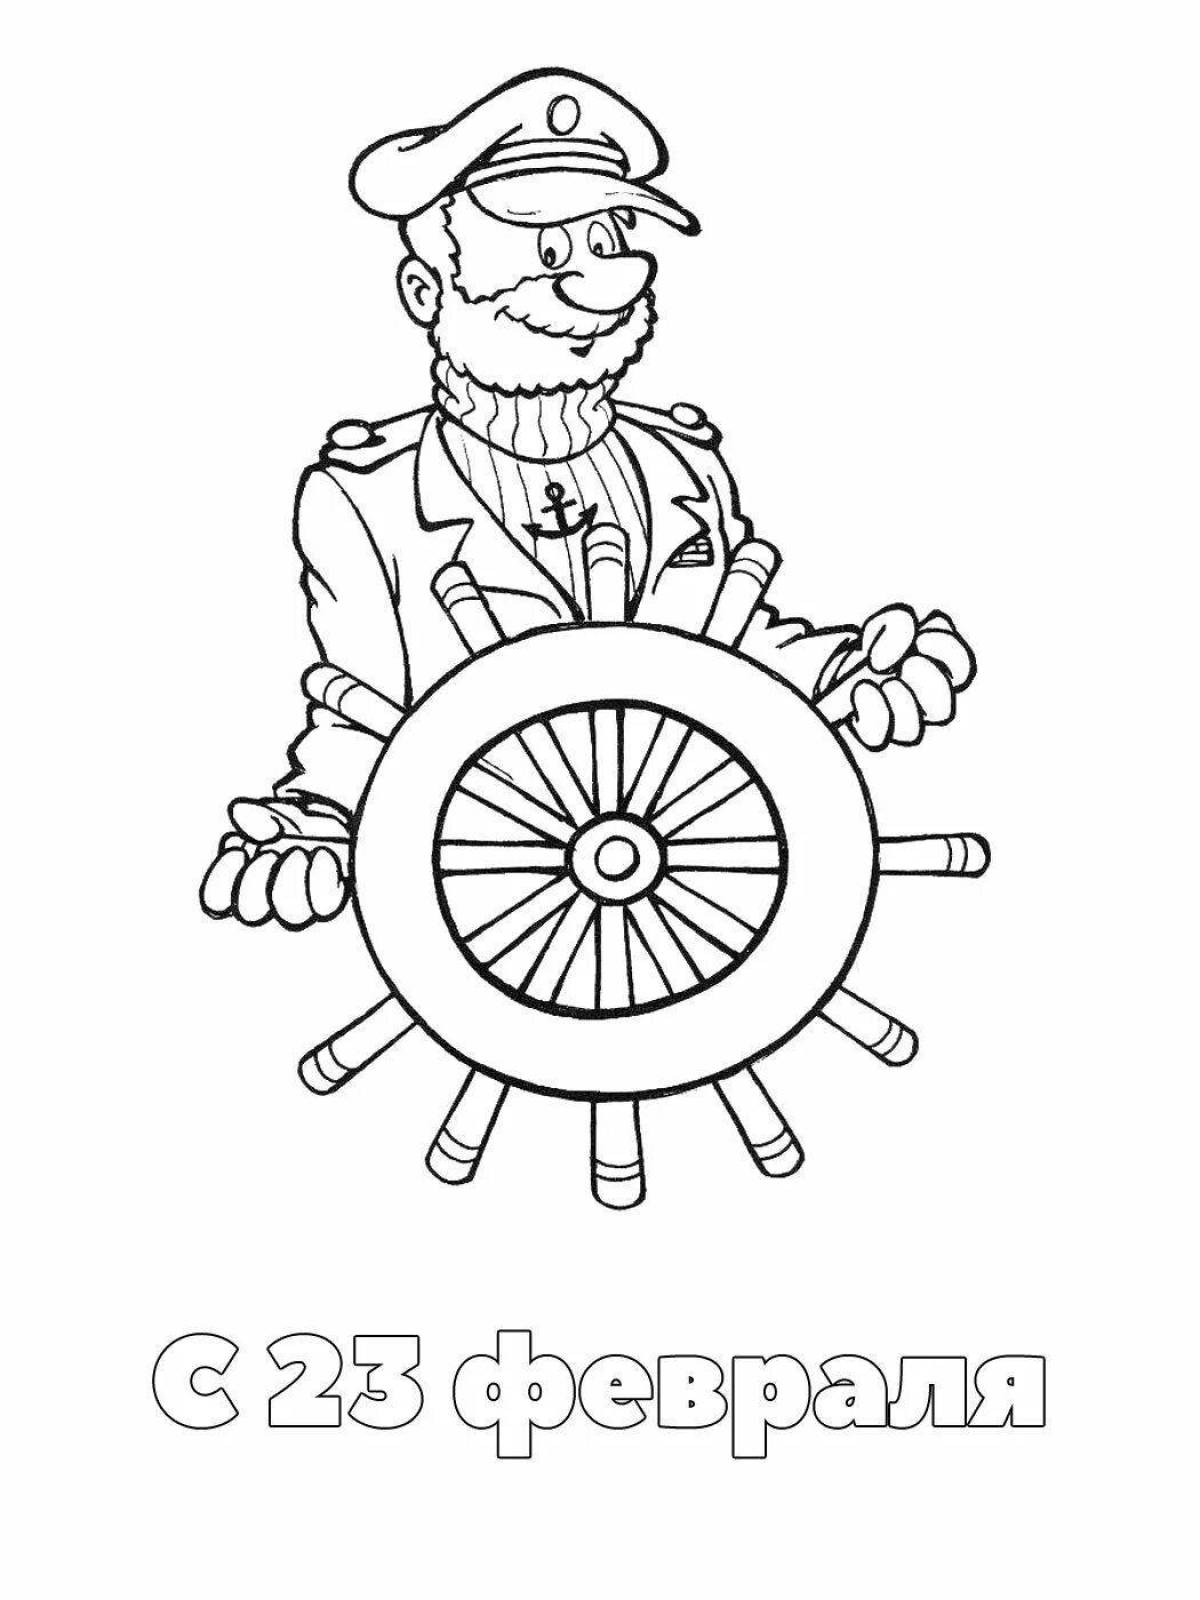 Dazzling captain vrungel coloring book